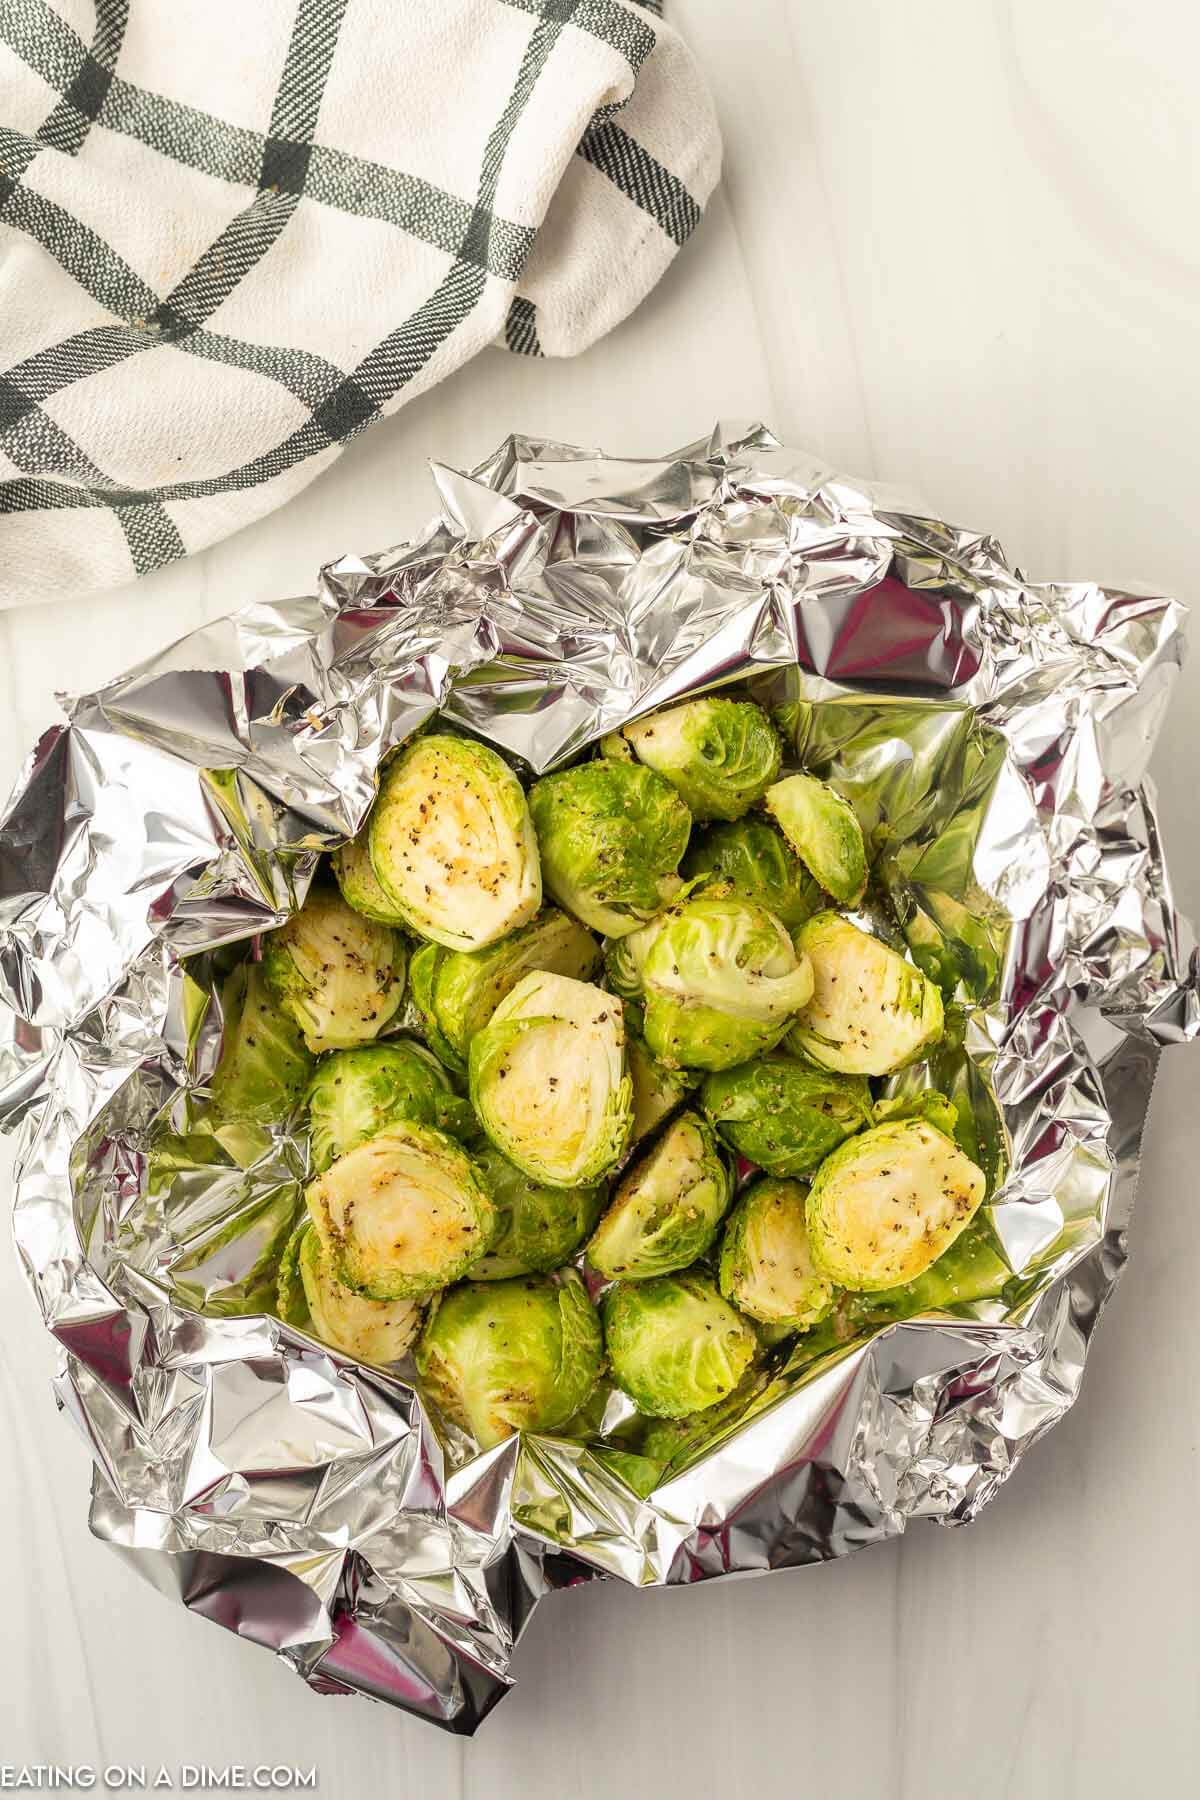 Add the seasoned brussel sprouts to the foil and make a foil packet. 